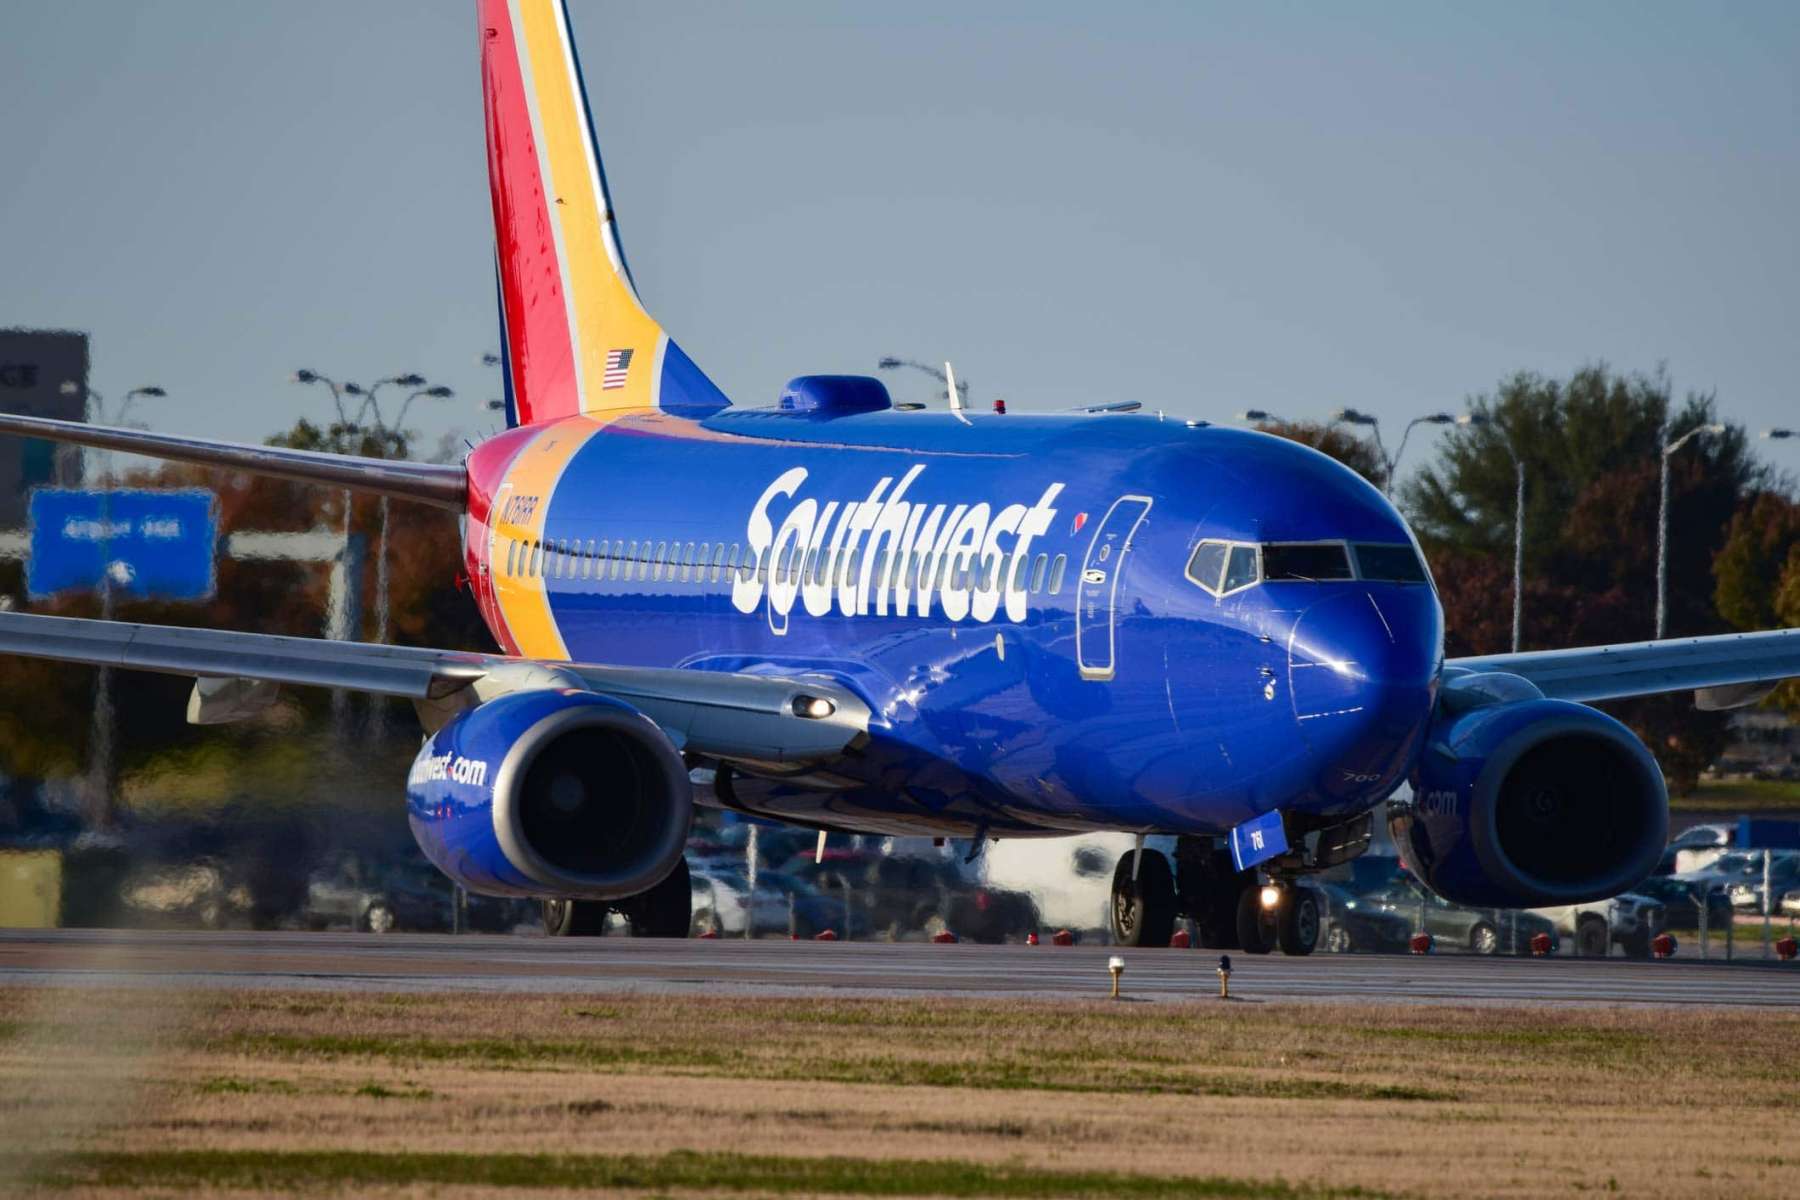 Travelers Beware: Flying Southwest Airlines Can Have Severe Consequences